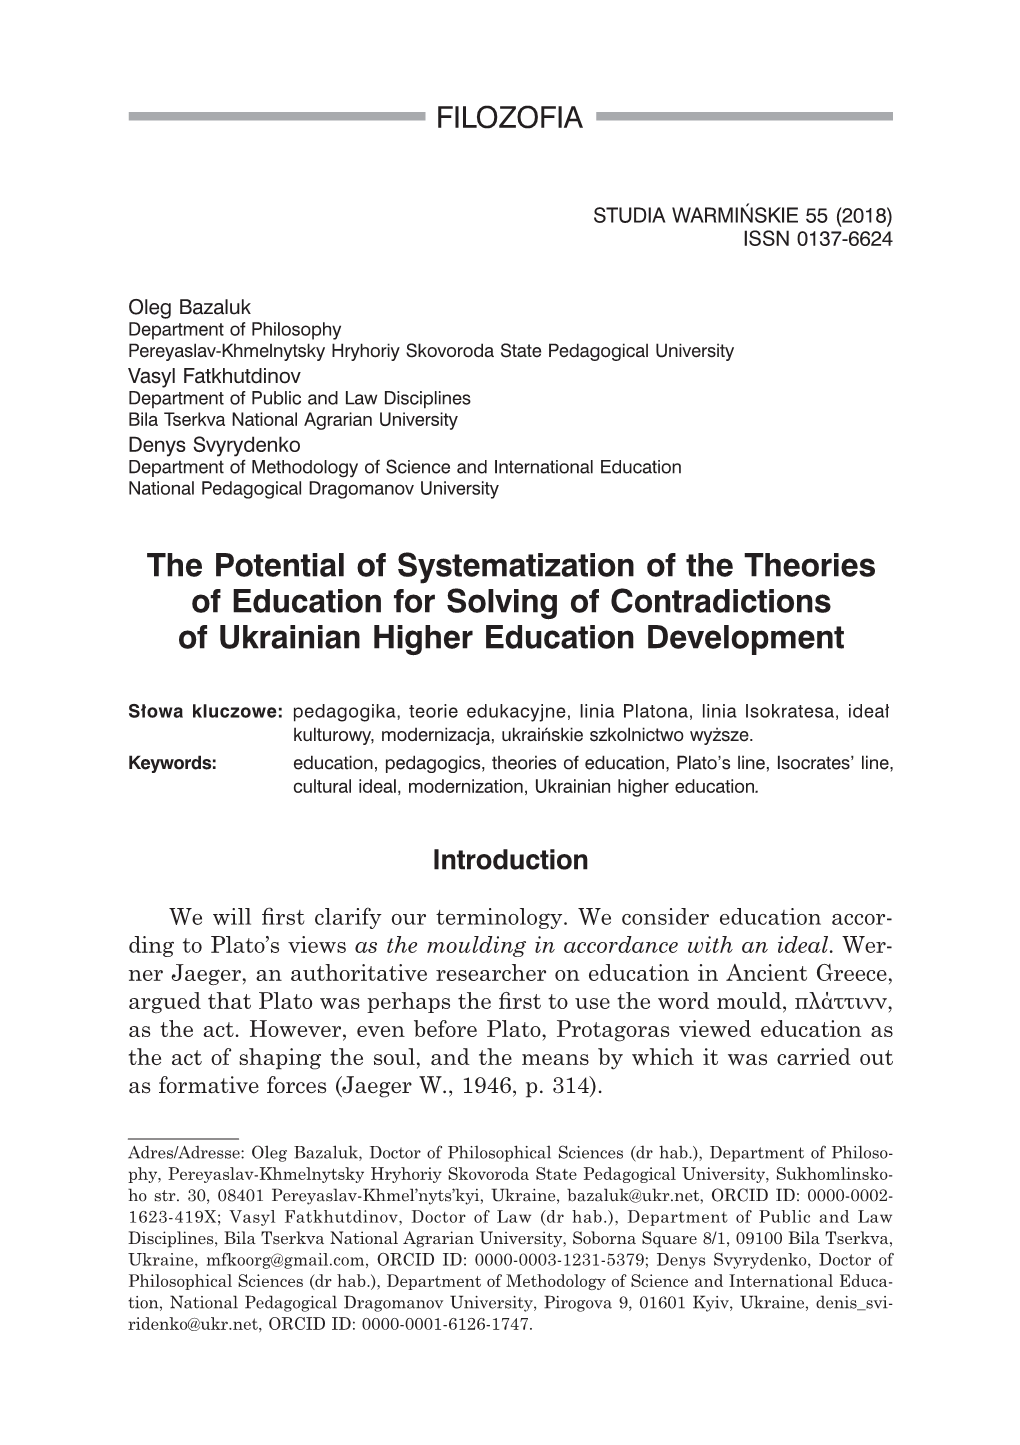 The Potential of Systematization of the Theories of Education for Solving of Contradictions of Ukrainian Higher Education Development